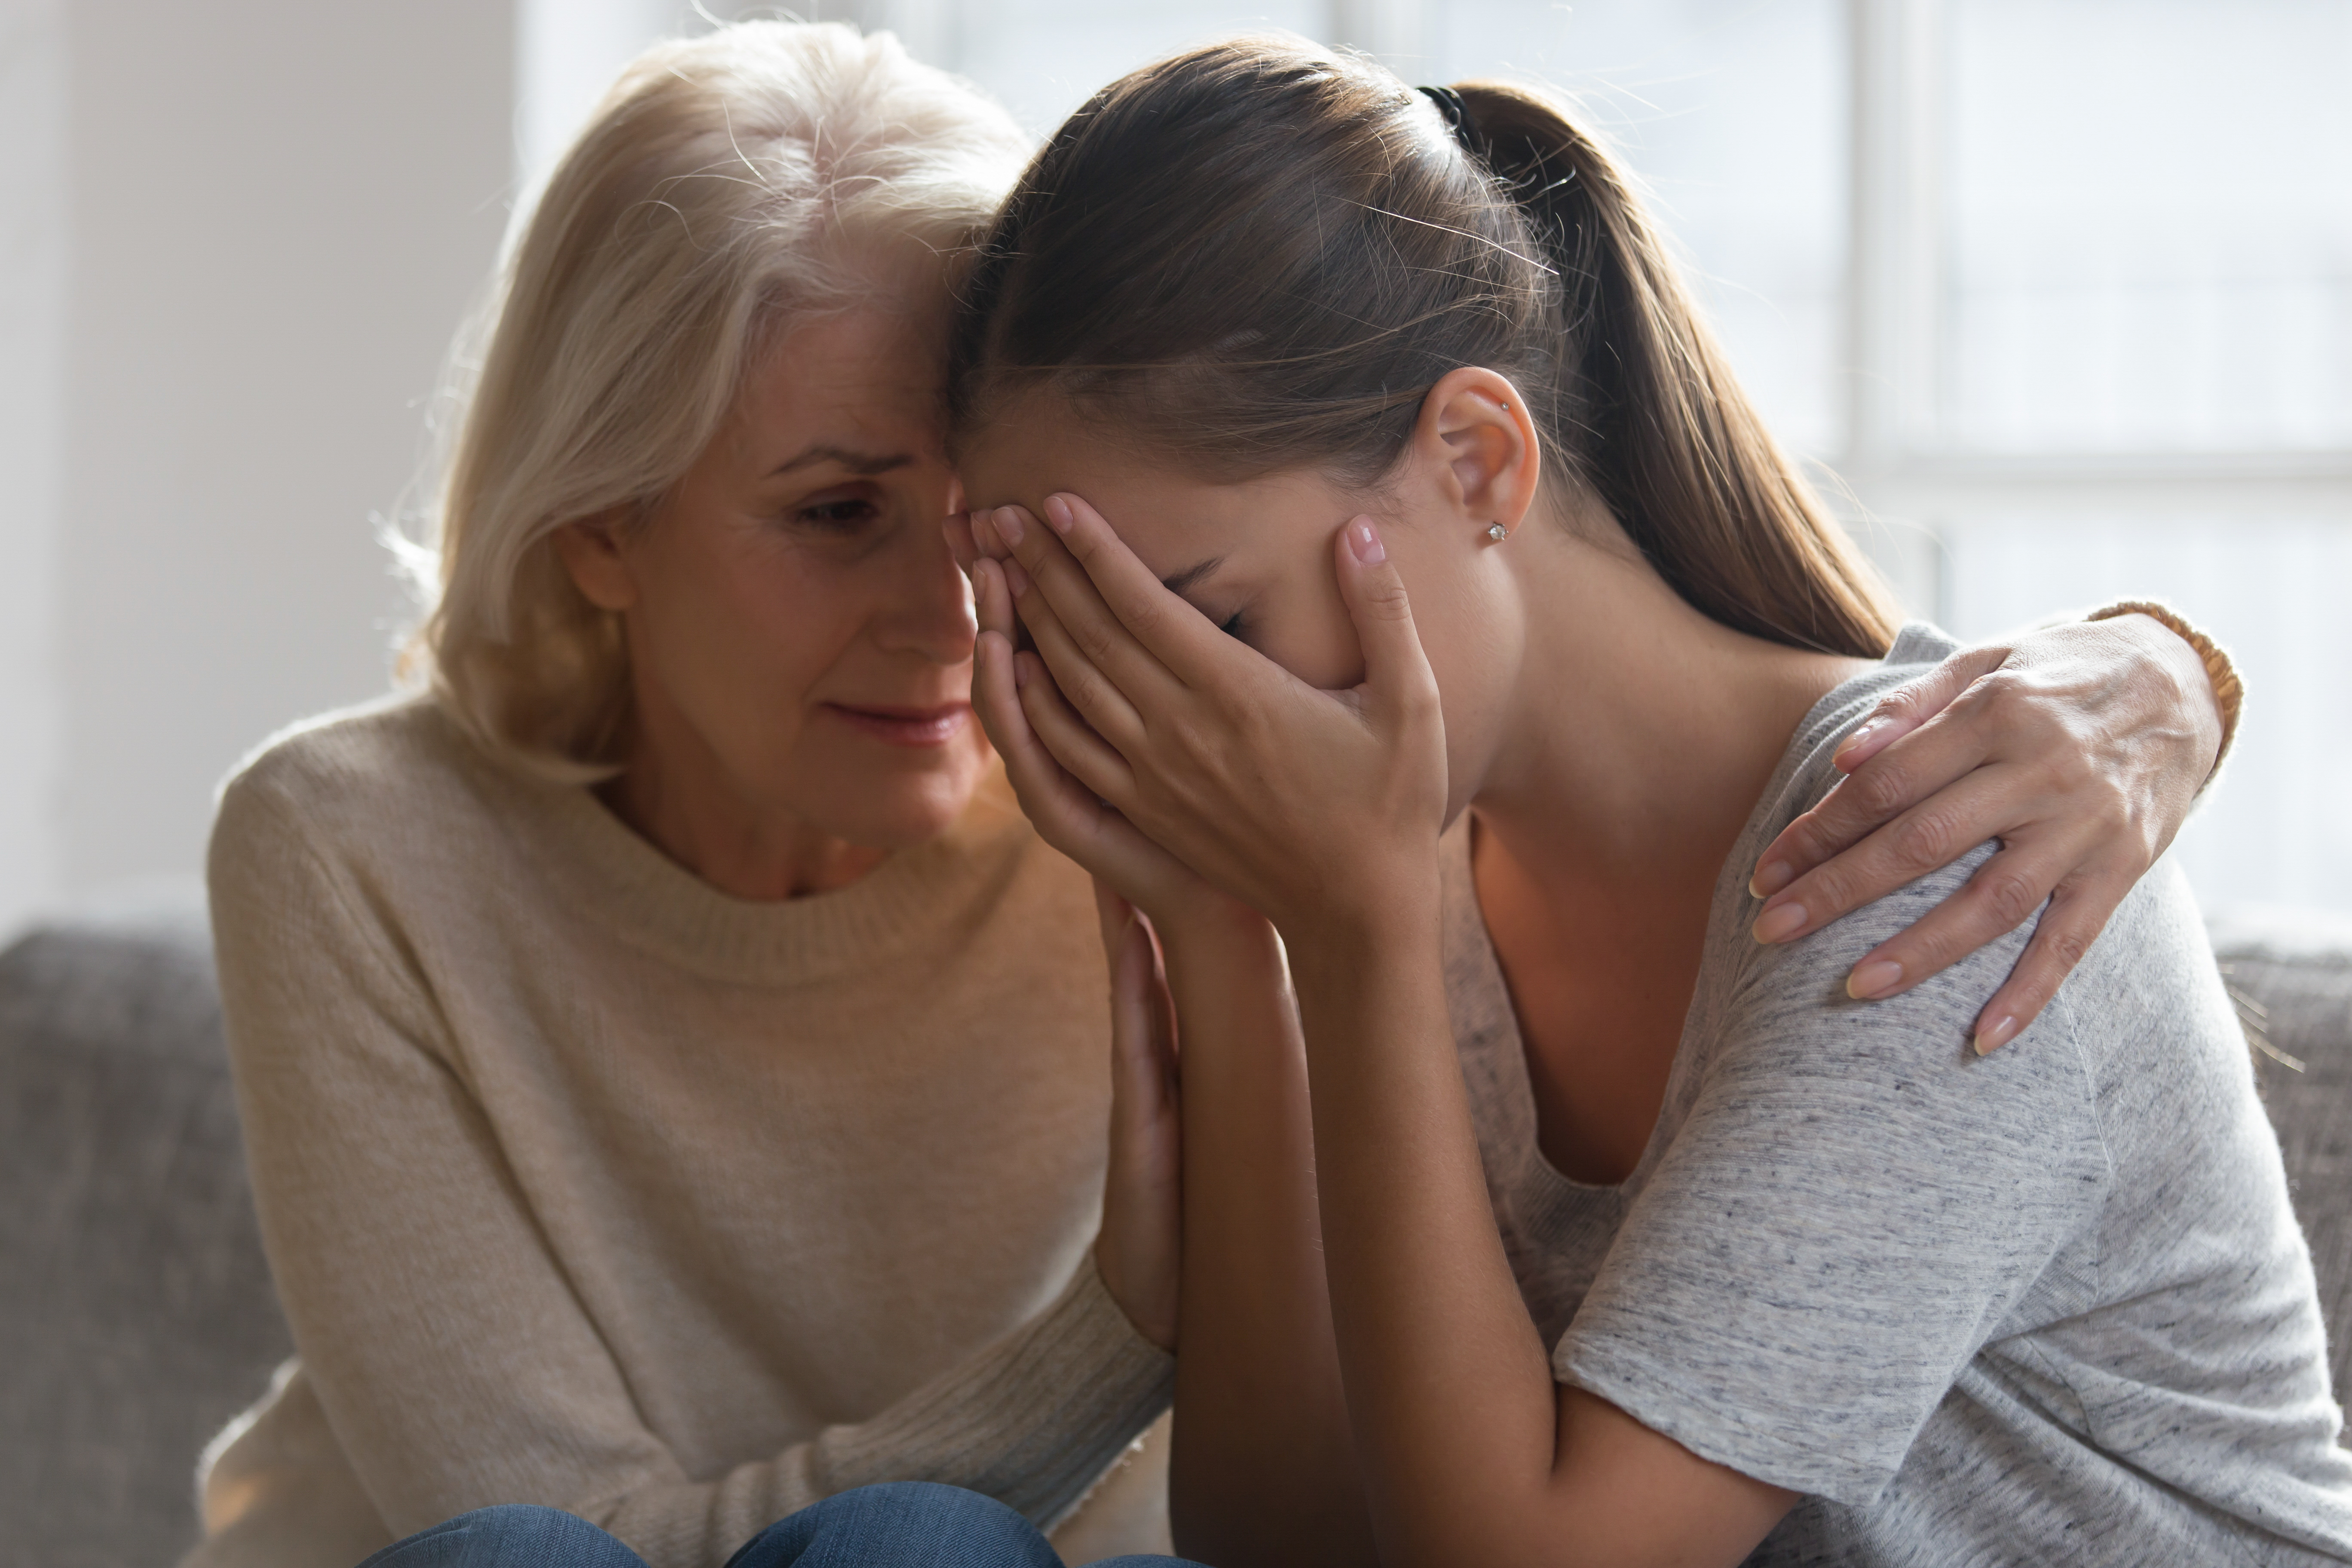 Worried aged mother embracing comforting grown up daughter with broken heart. | Source: Shutterstock